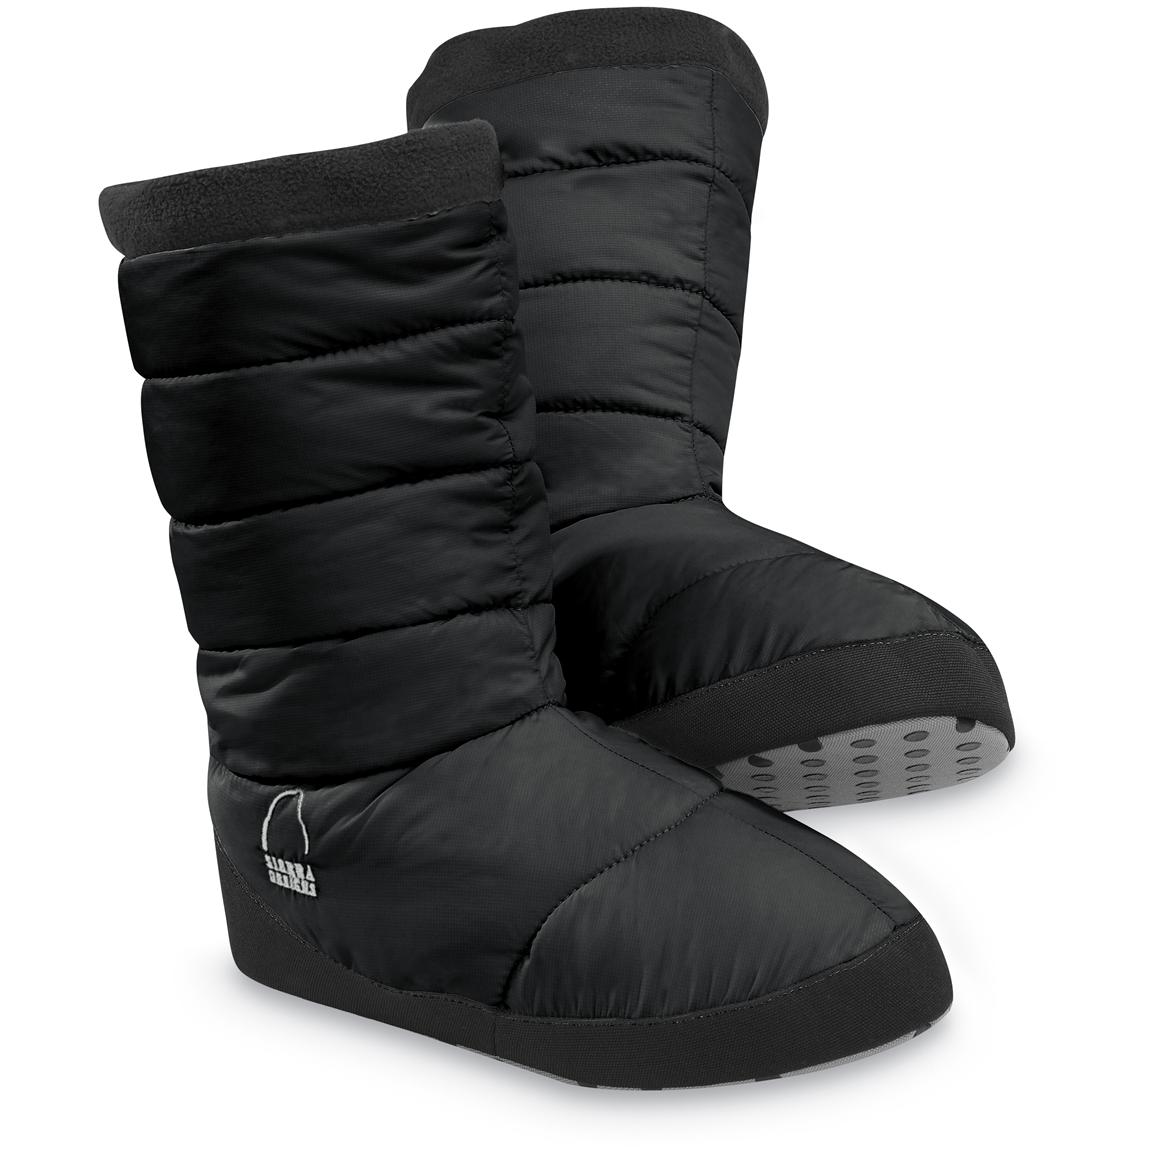 Womens Sierra Designs® Pull On Down Booties 191593 Slippers At Sportsmans Guide 